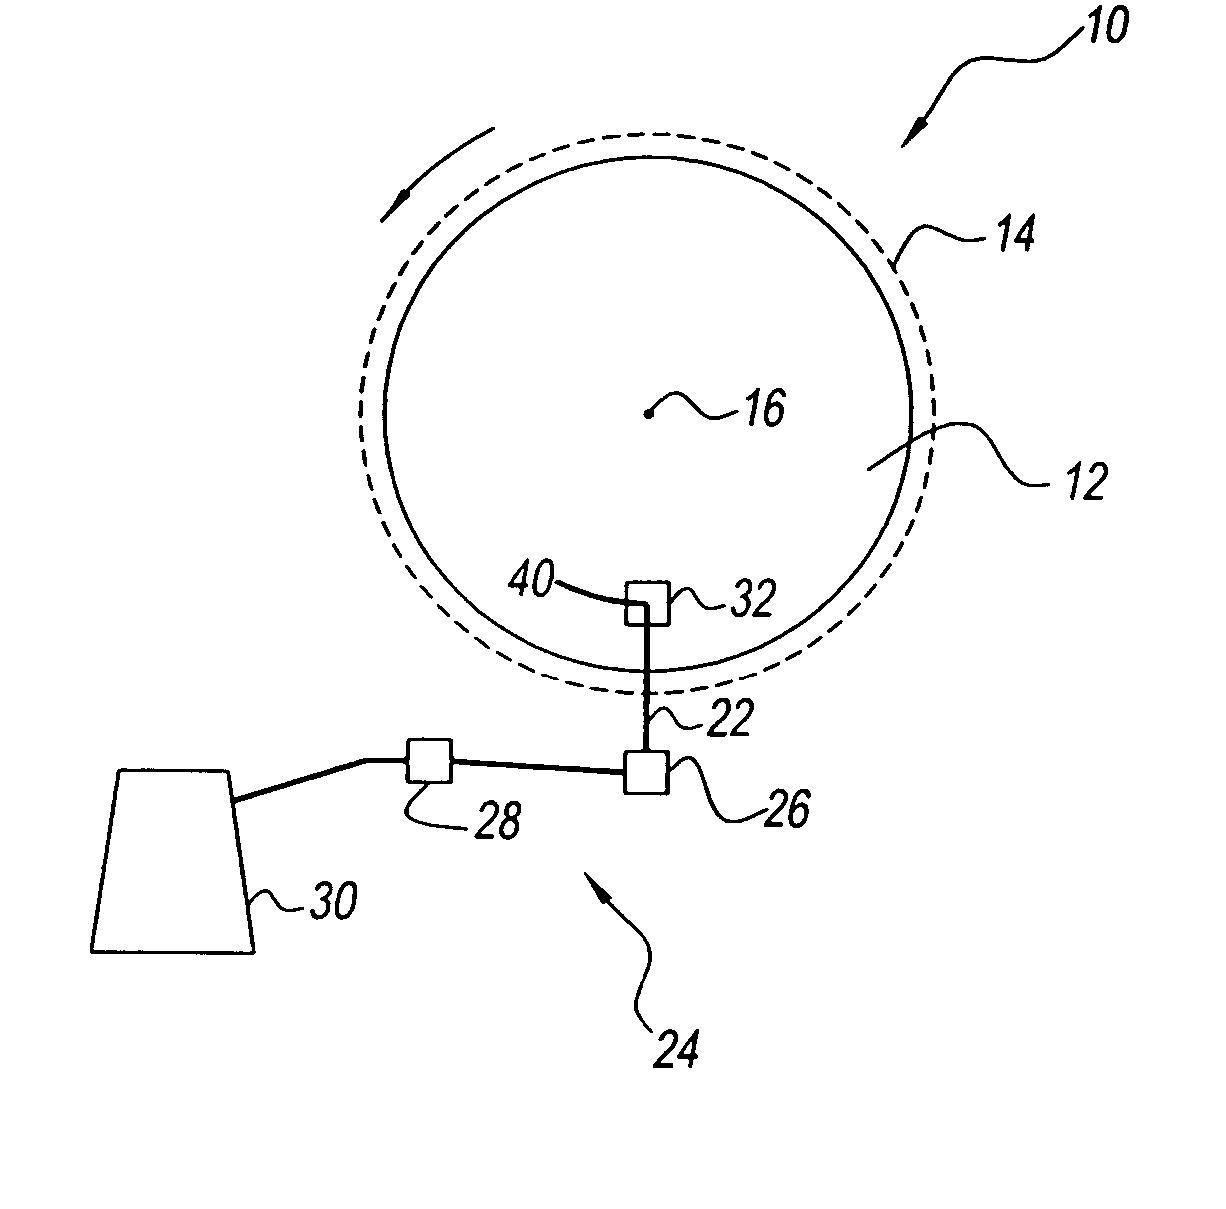 Method of knitting an elastomeric yarn into a circularly knitted fabric